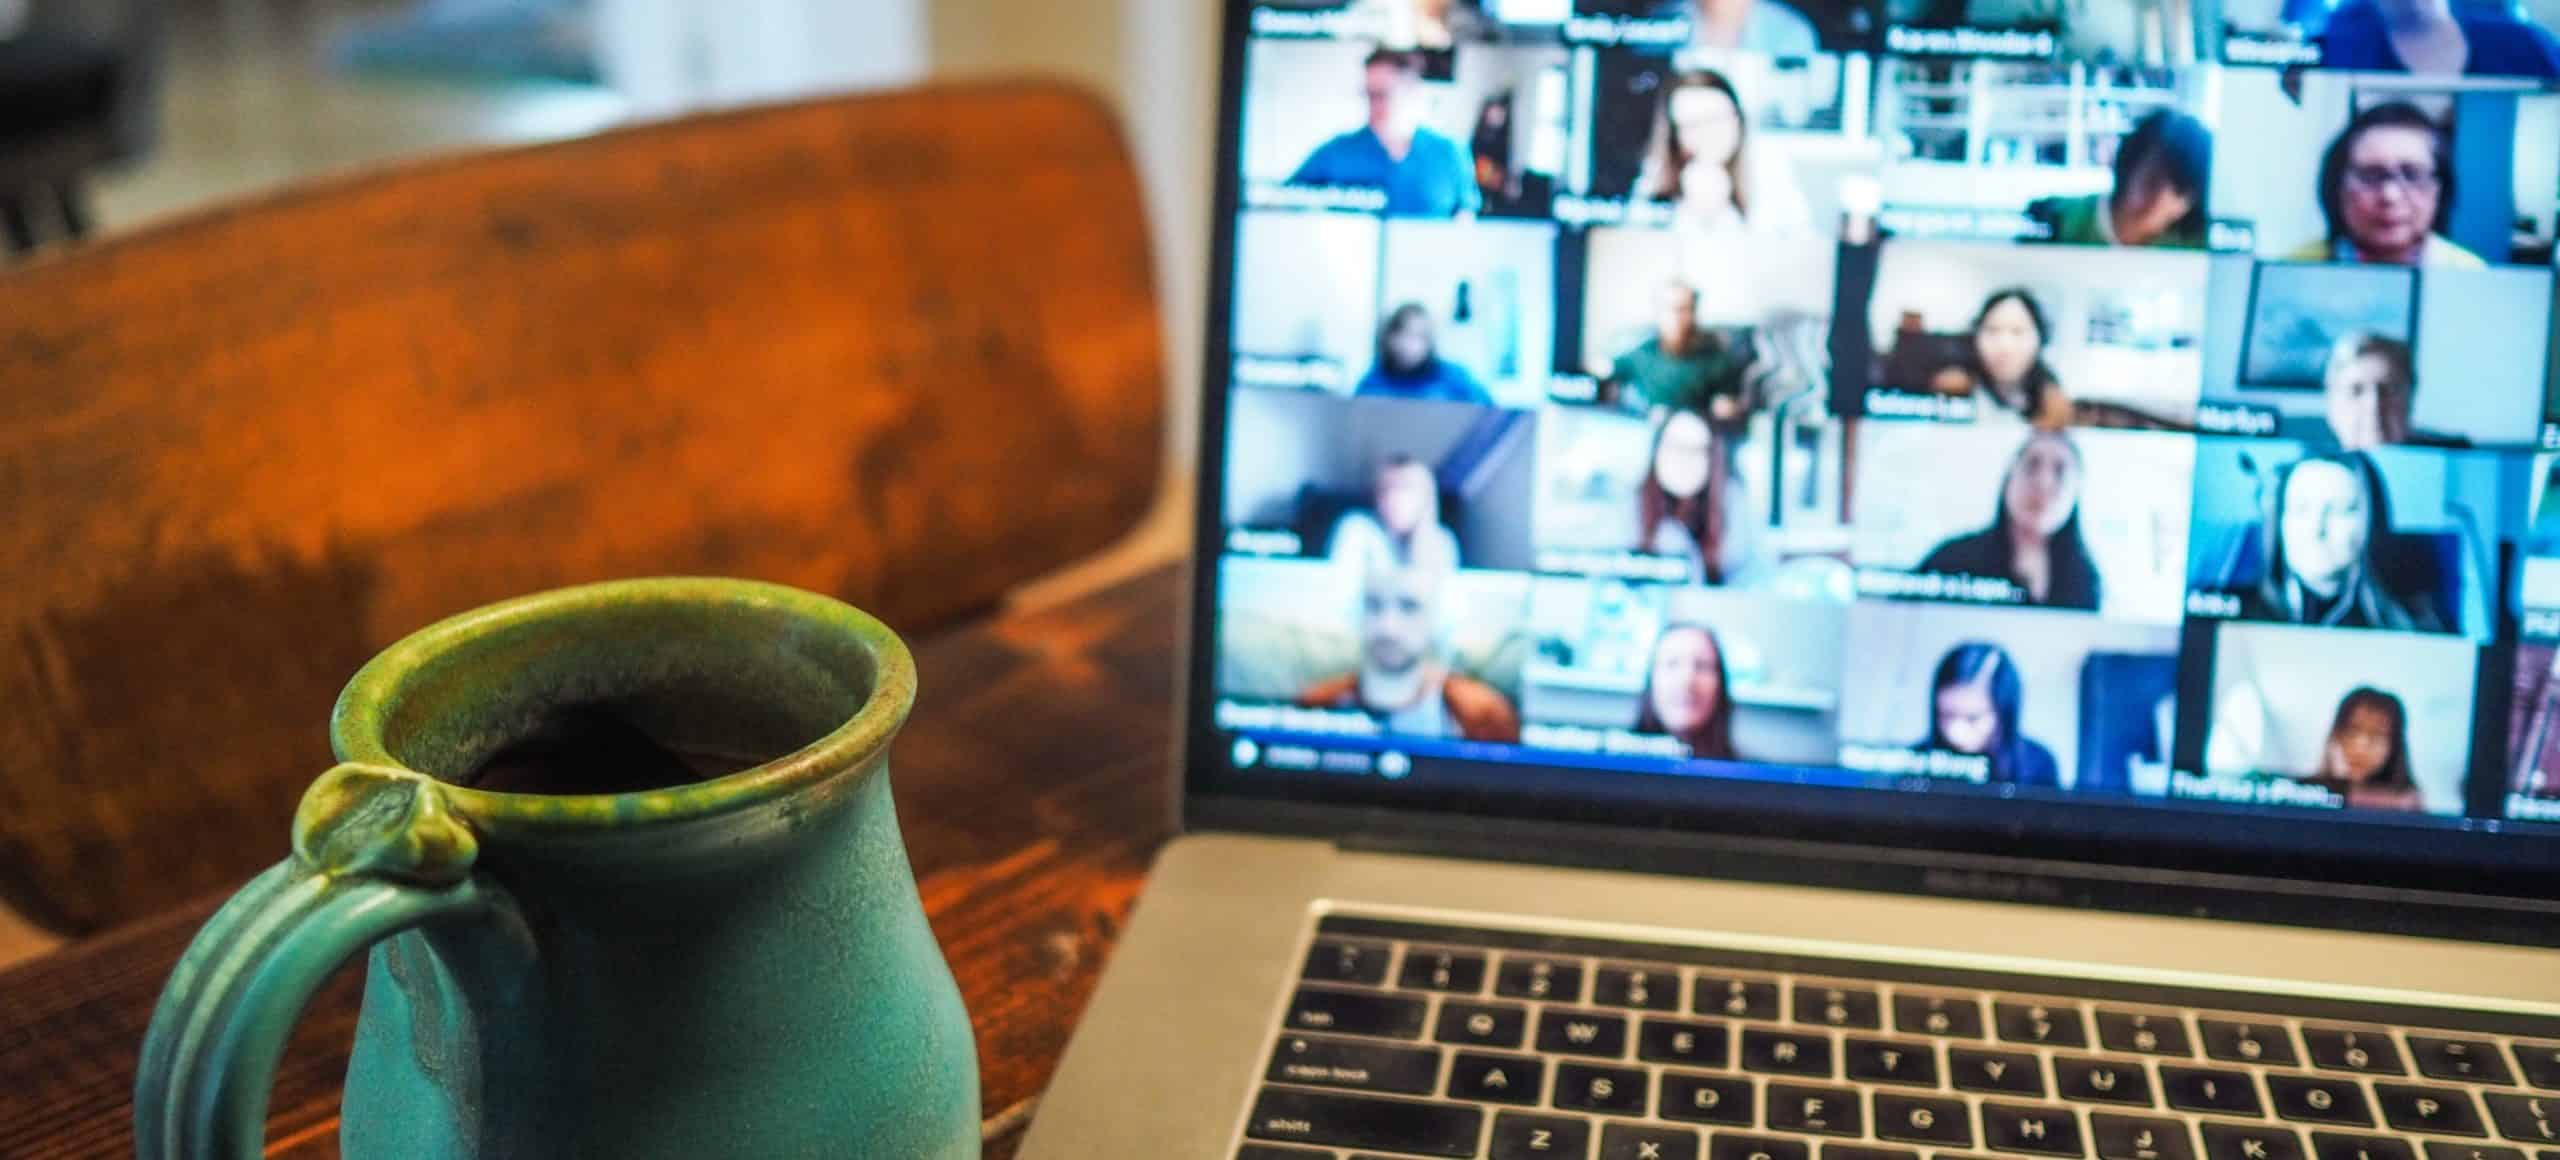 A laptop with a Zoom meeting on the screen and a pottery coffee mug